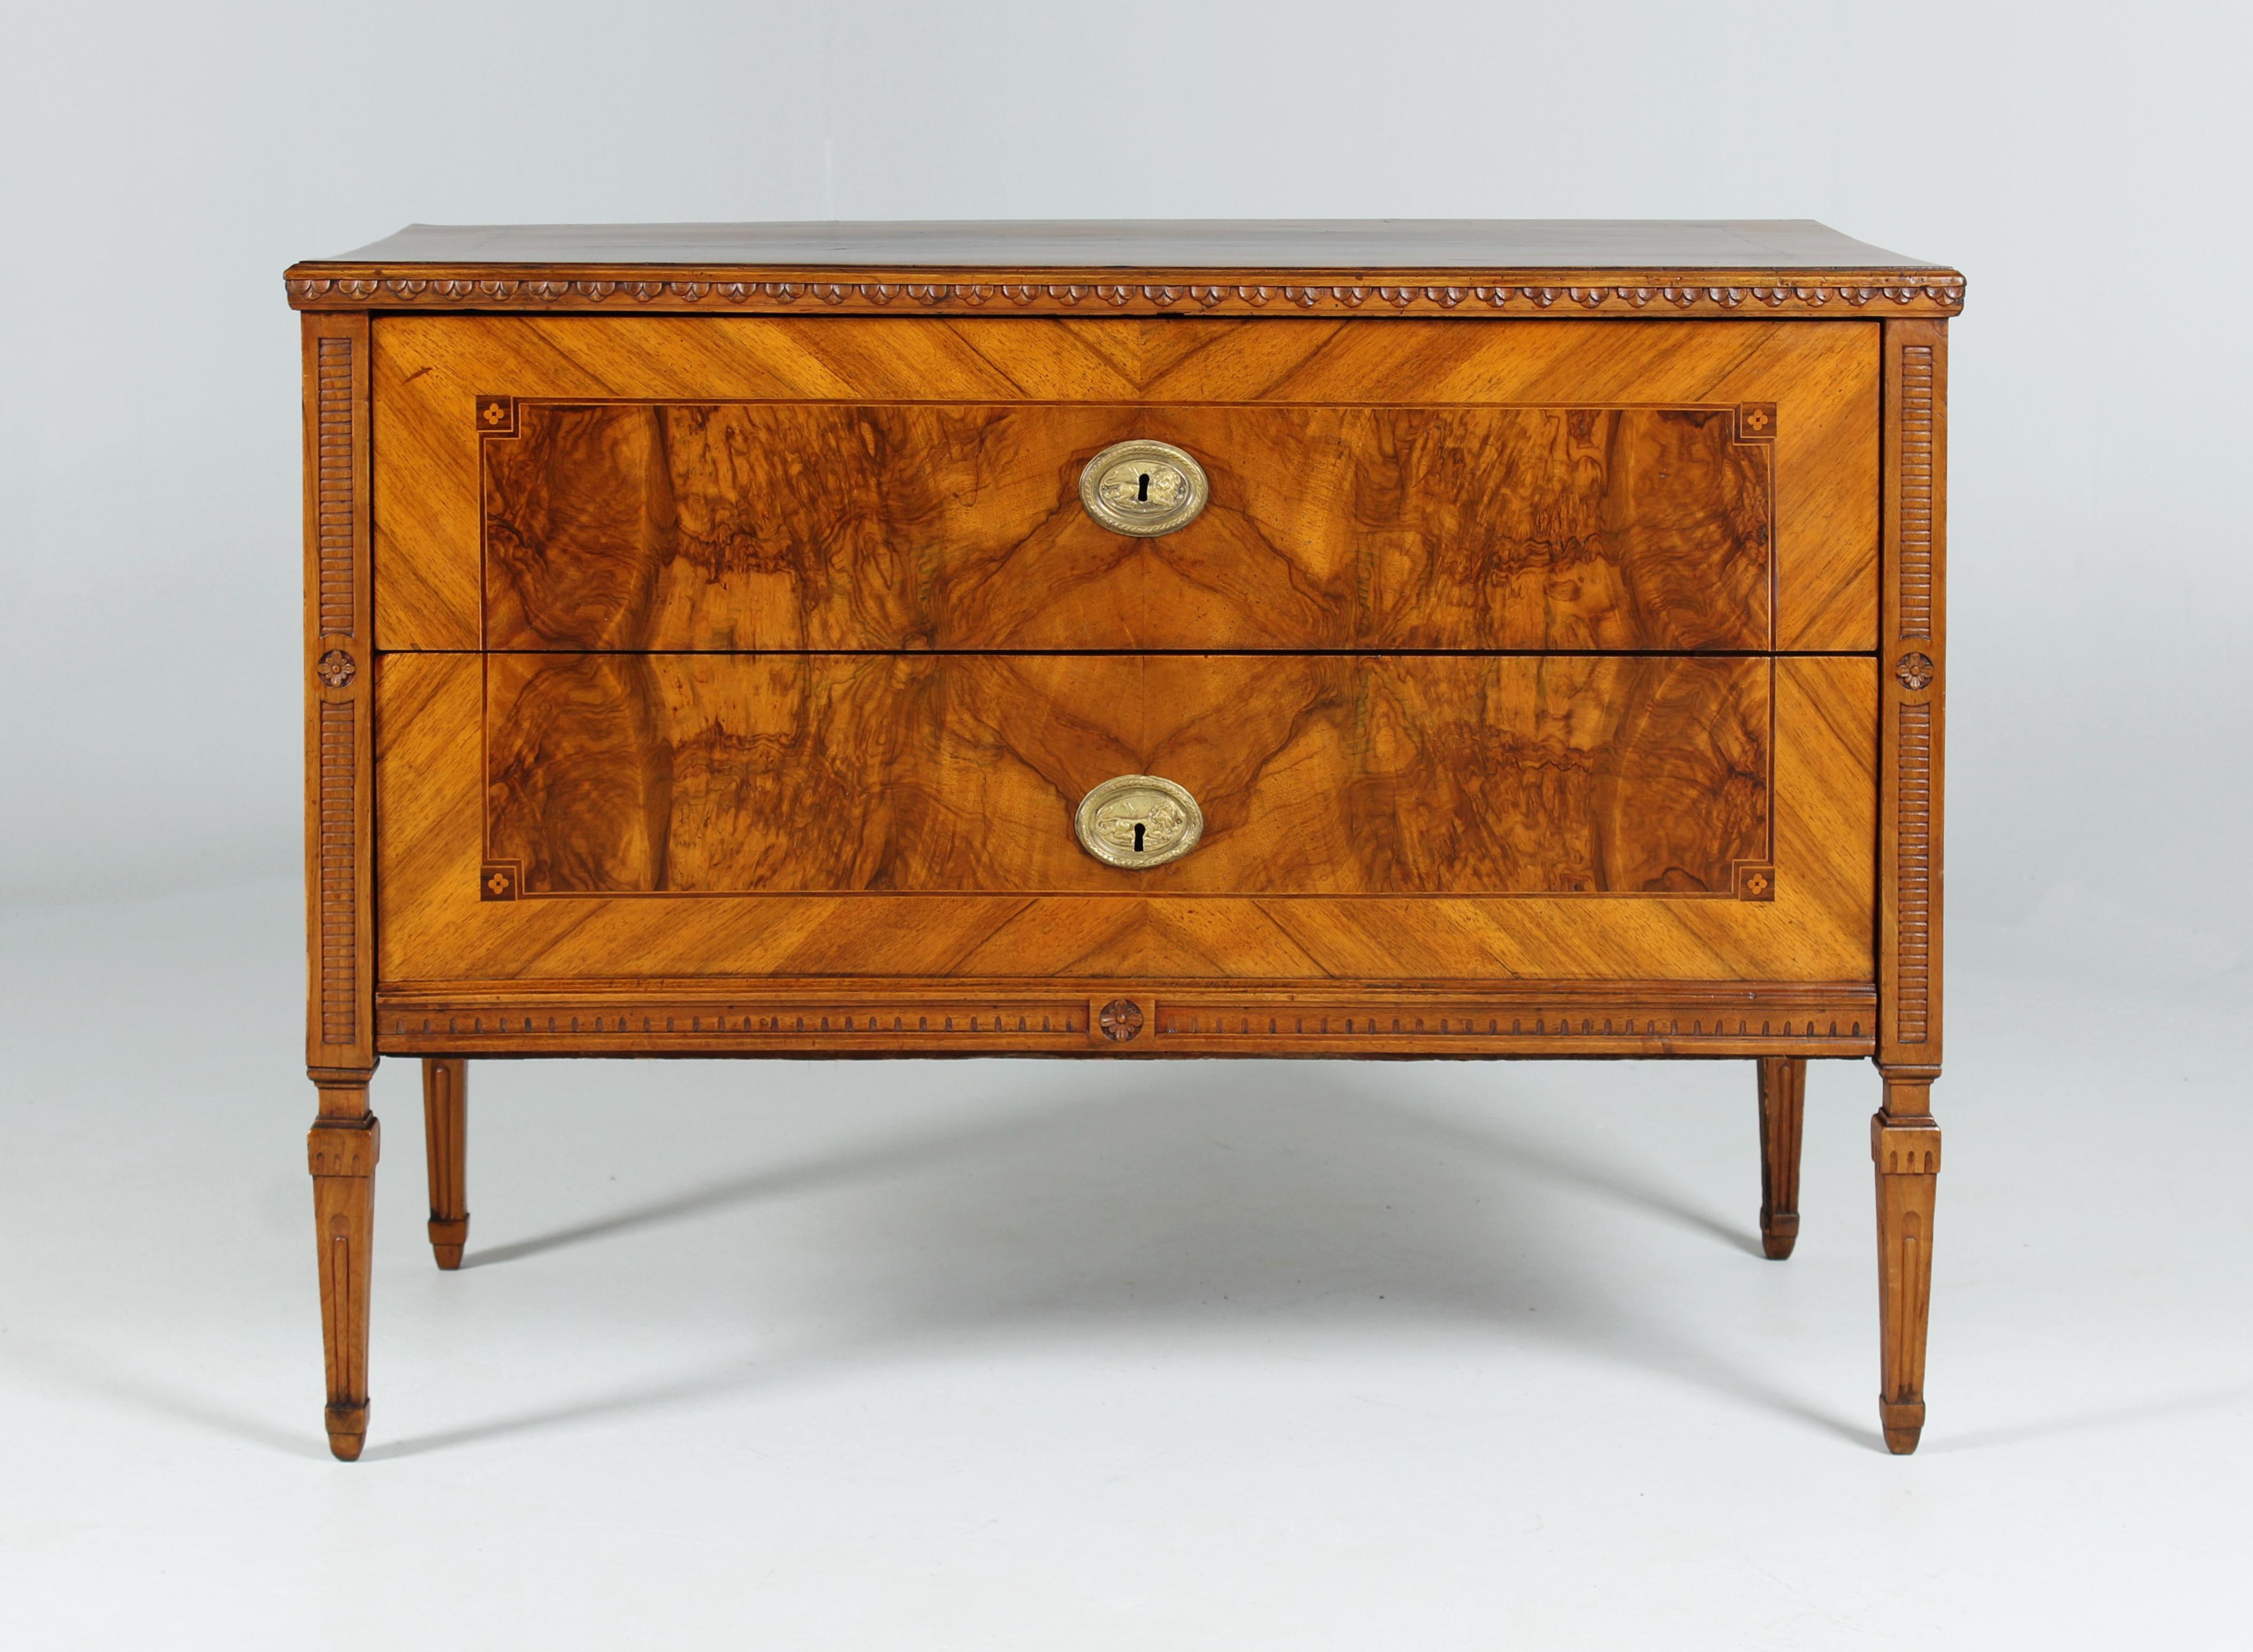 Hand-Carved German Louis XVI Chest Of Drawers with Carvings and Marquetry, circa 1780